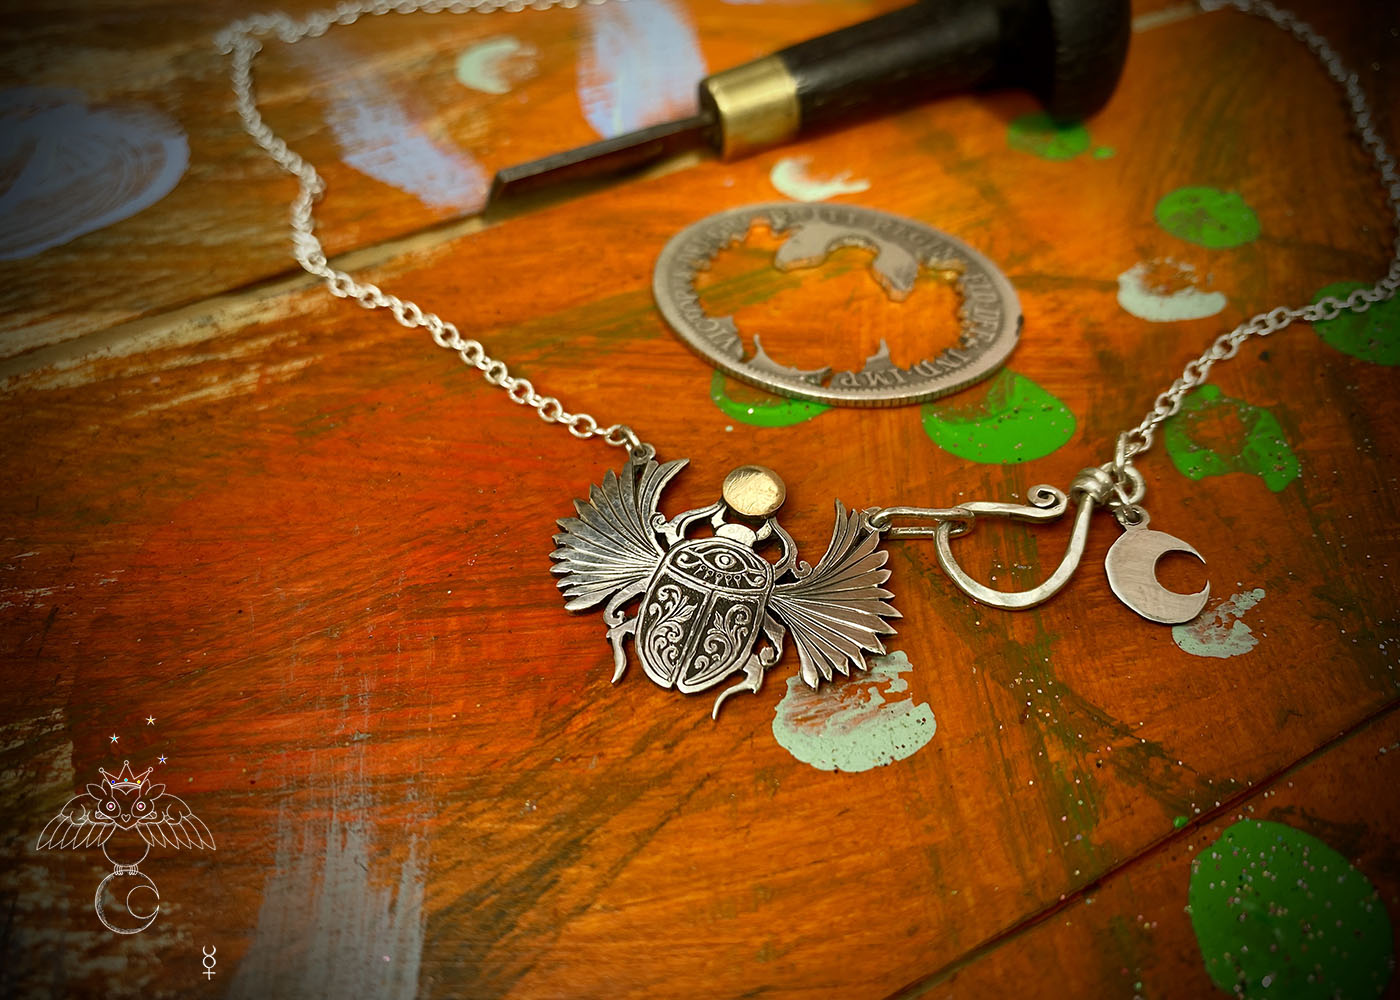 Scarab beetle jewellery - handmade and recycled silver & gold coins